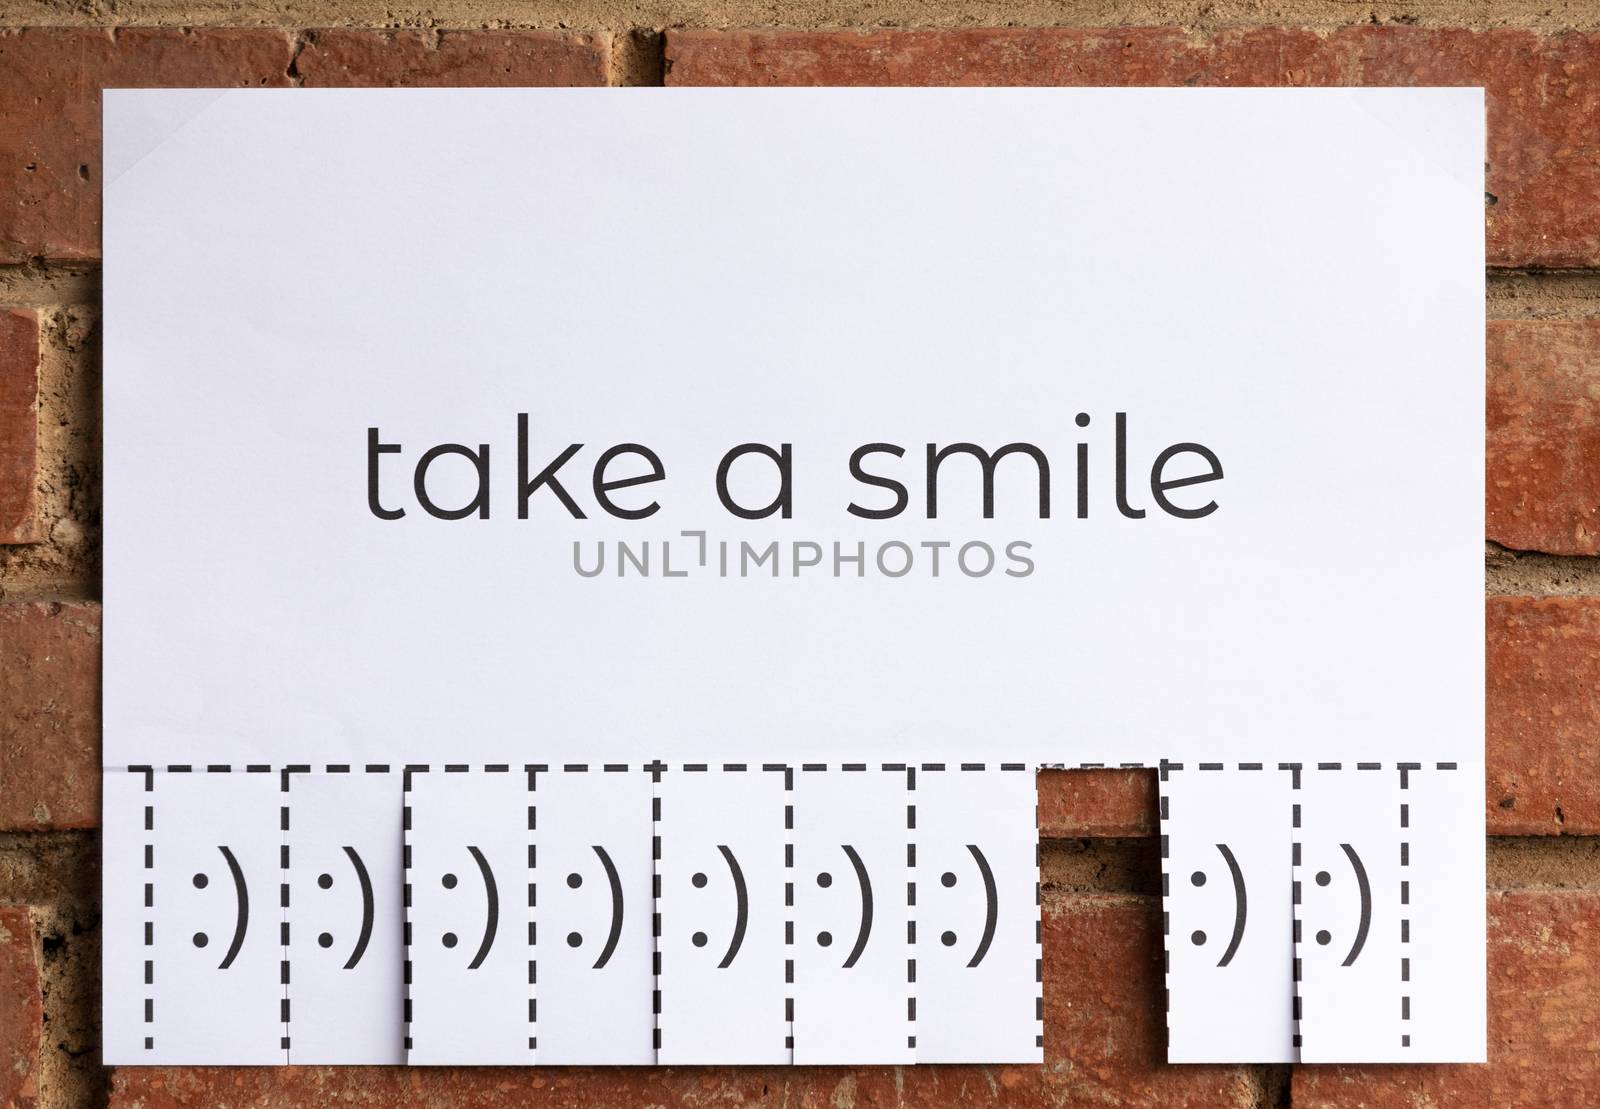 A paper with the phrase "Take a Smile" writen on it with different pieces with smile faces to tear off. Smiling is free. The image is from the front.